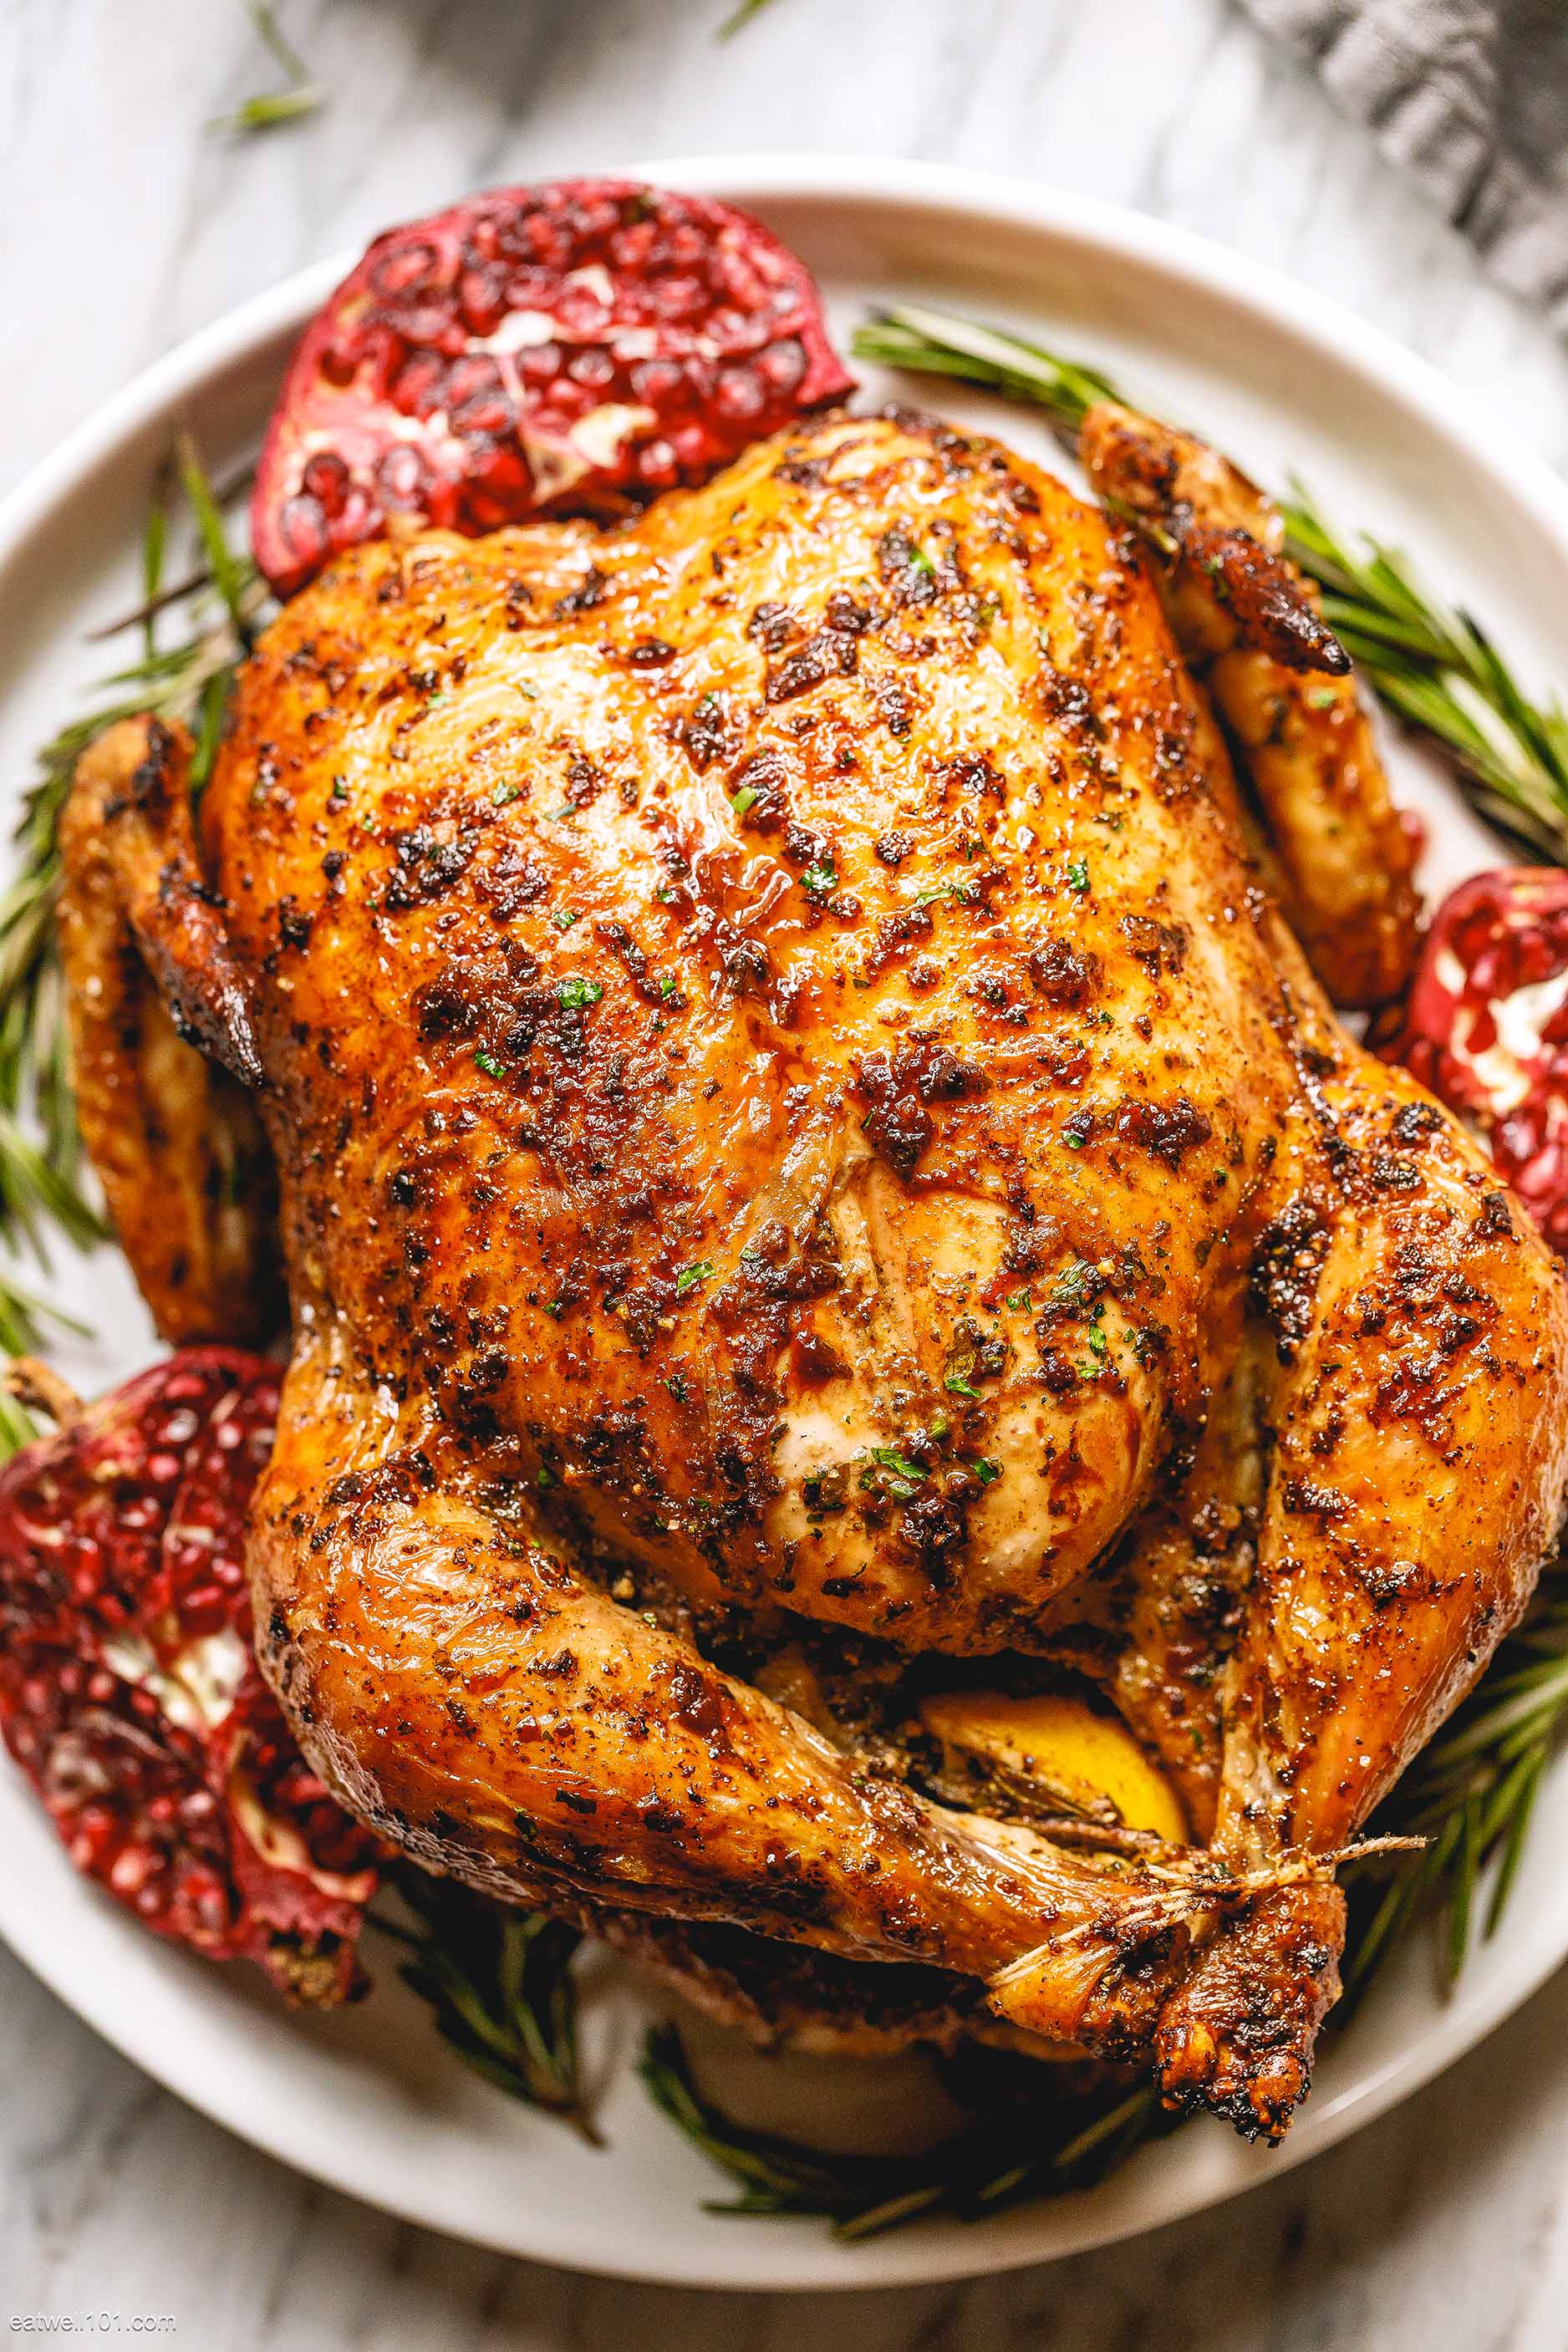 Roasted Chicken Recipe with Garlic Herb Butter – Whole Roasted Chicken